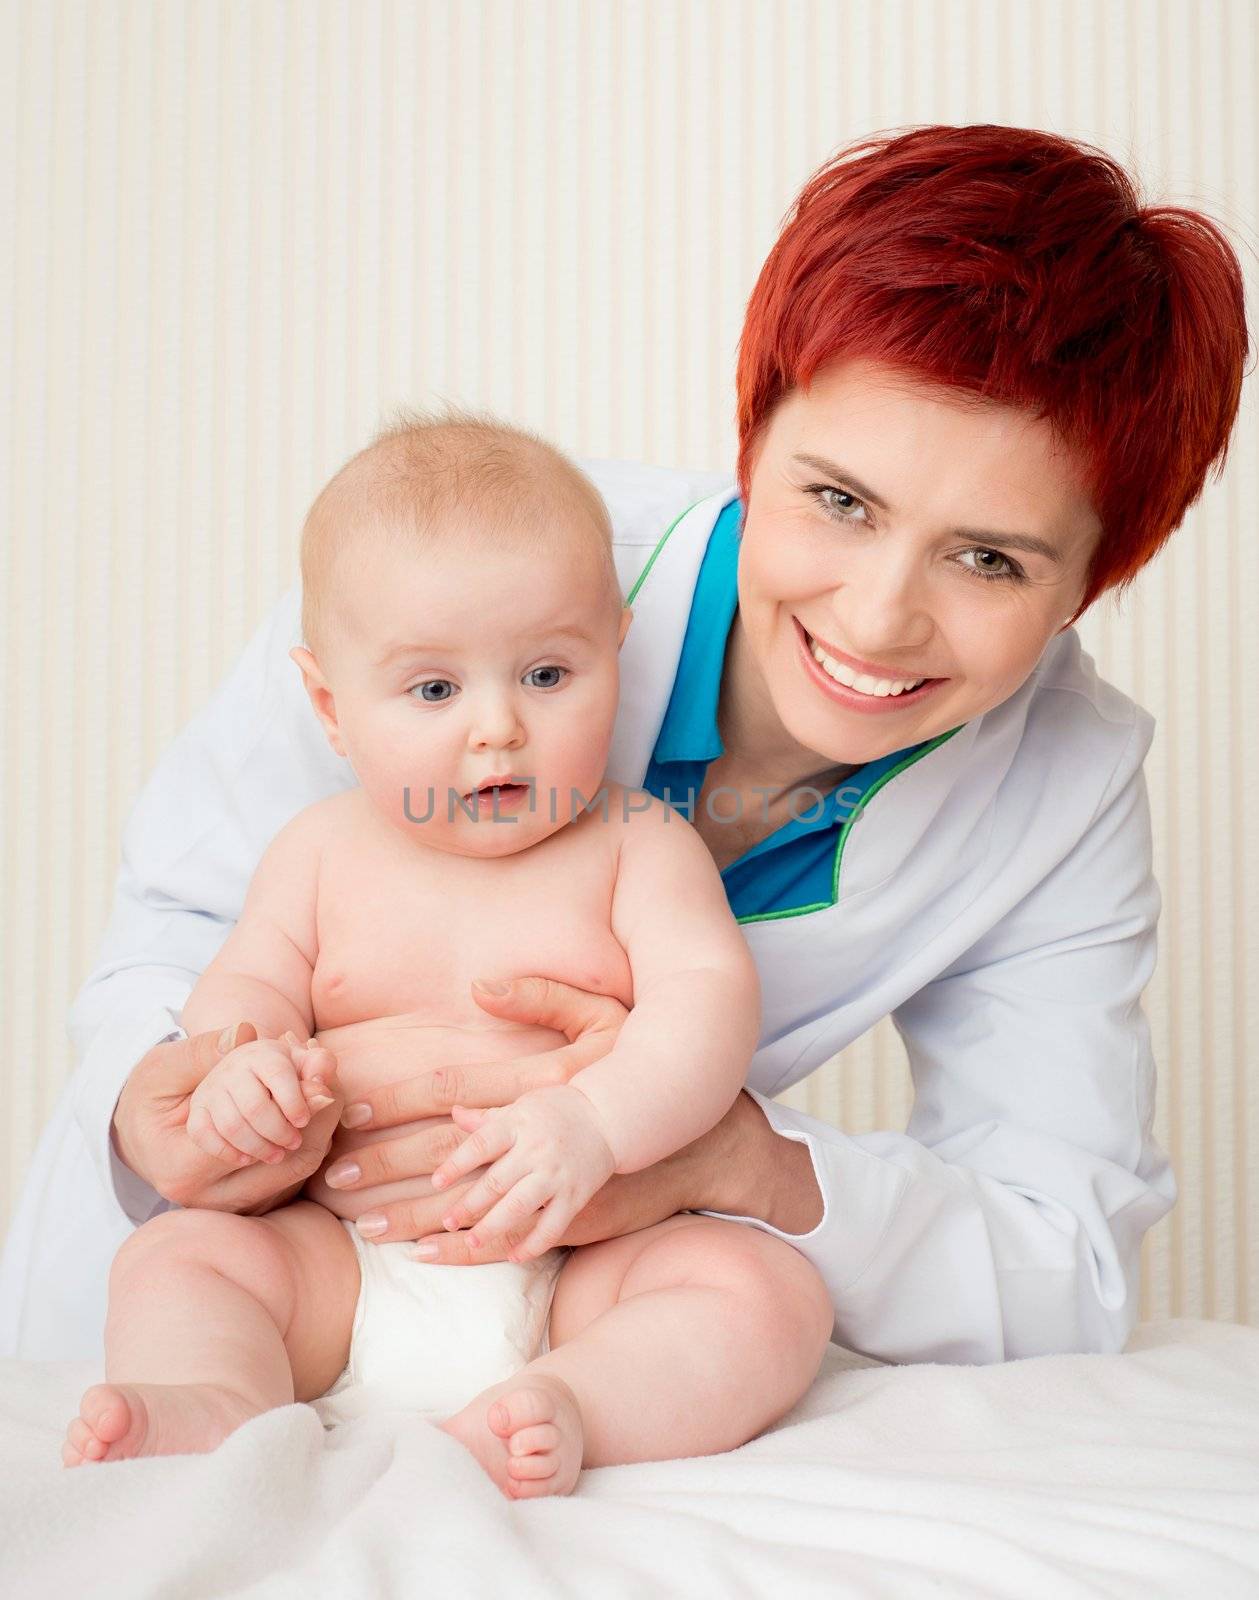 Smiling doctor with adorable baby